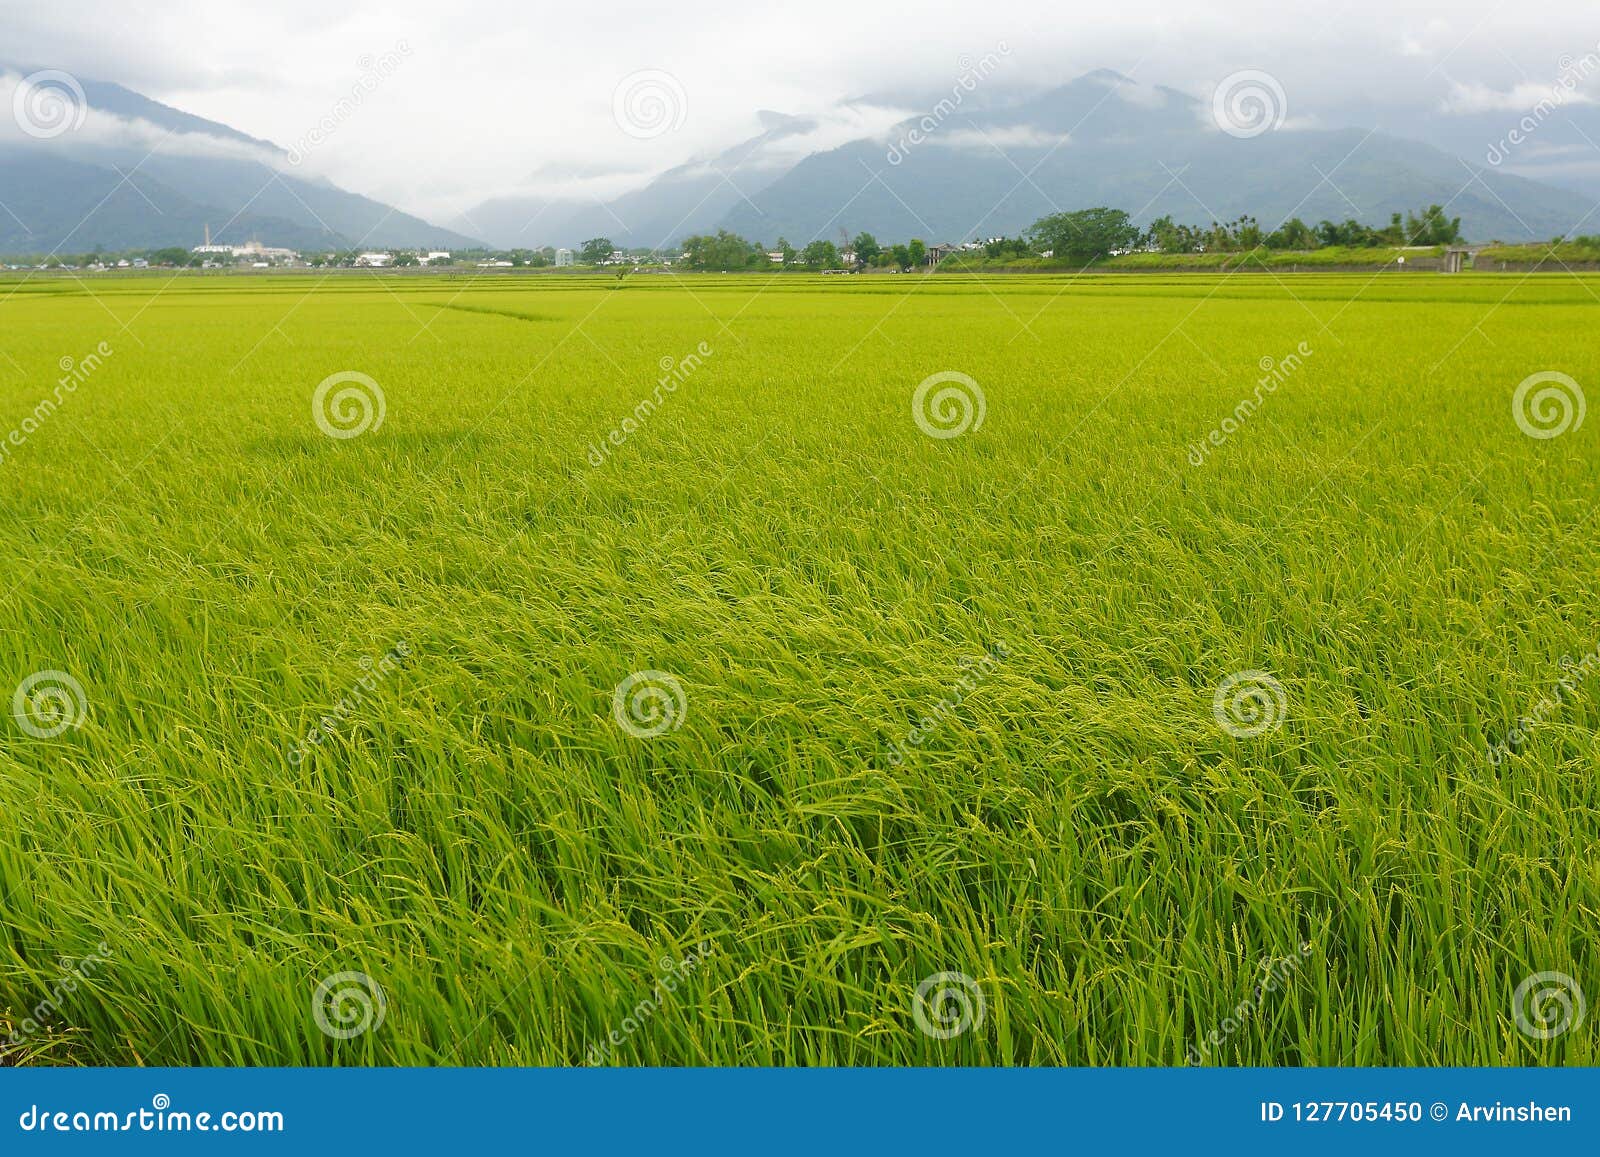 The Rice Fields In Taiwan Stock Photo Image Of Township 127705450